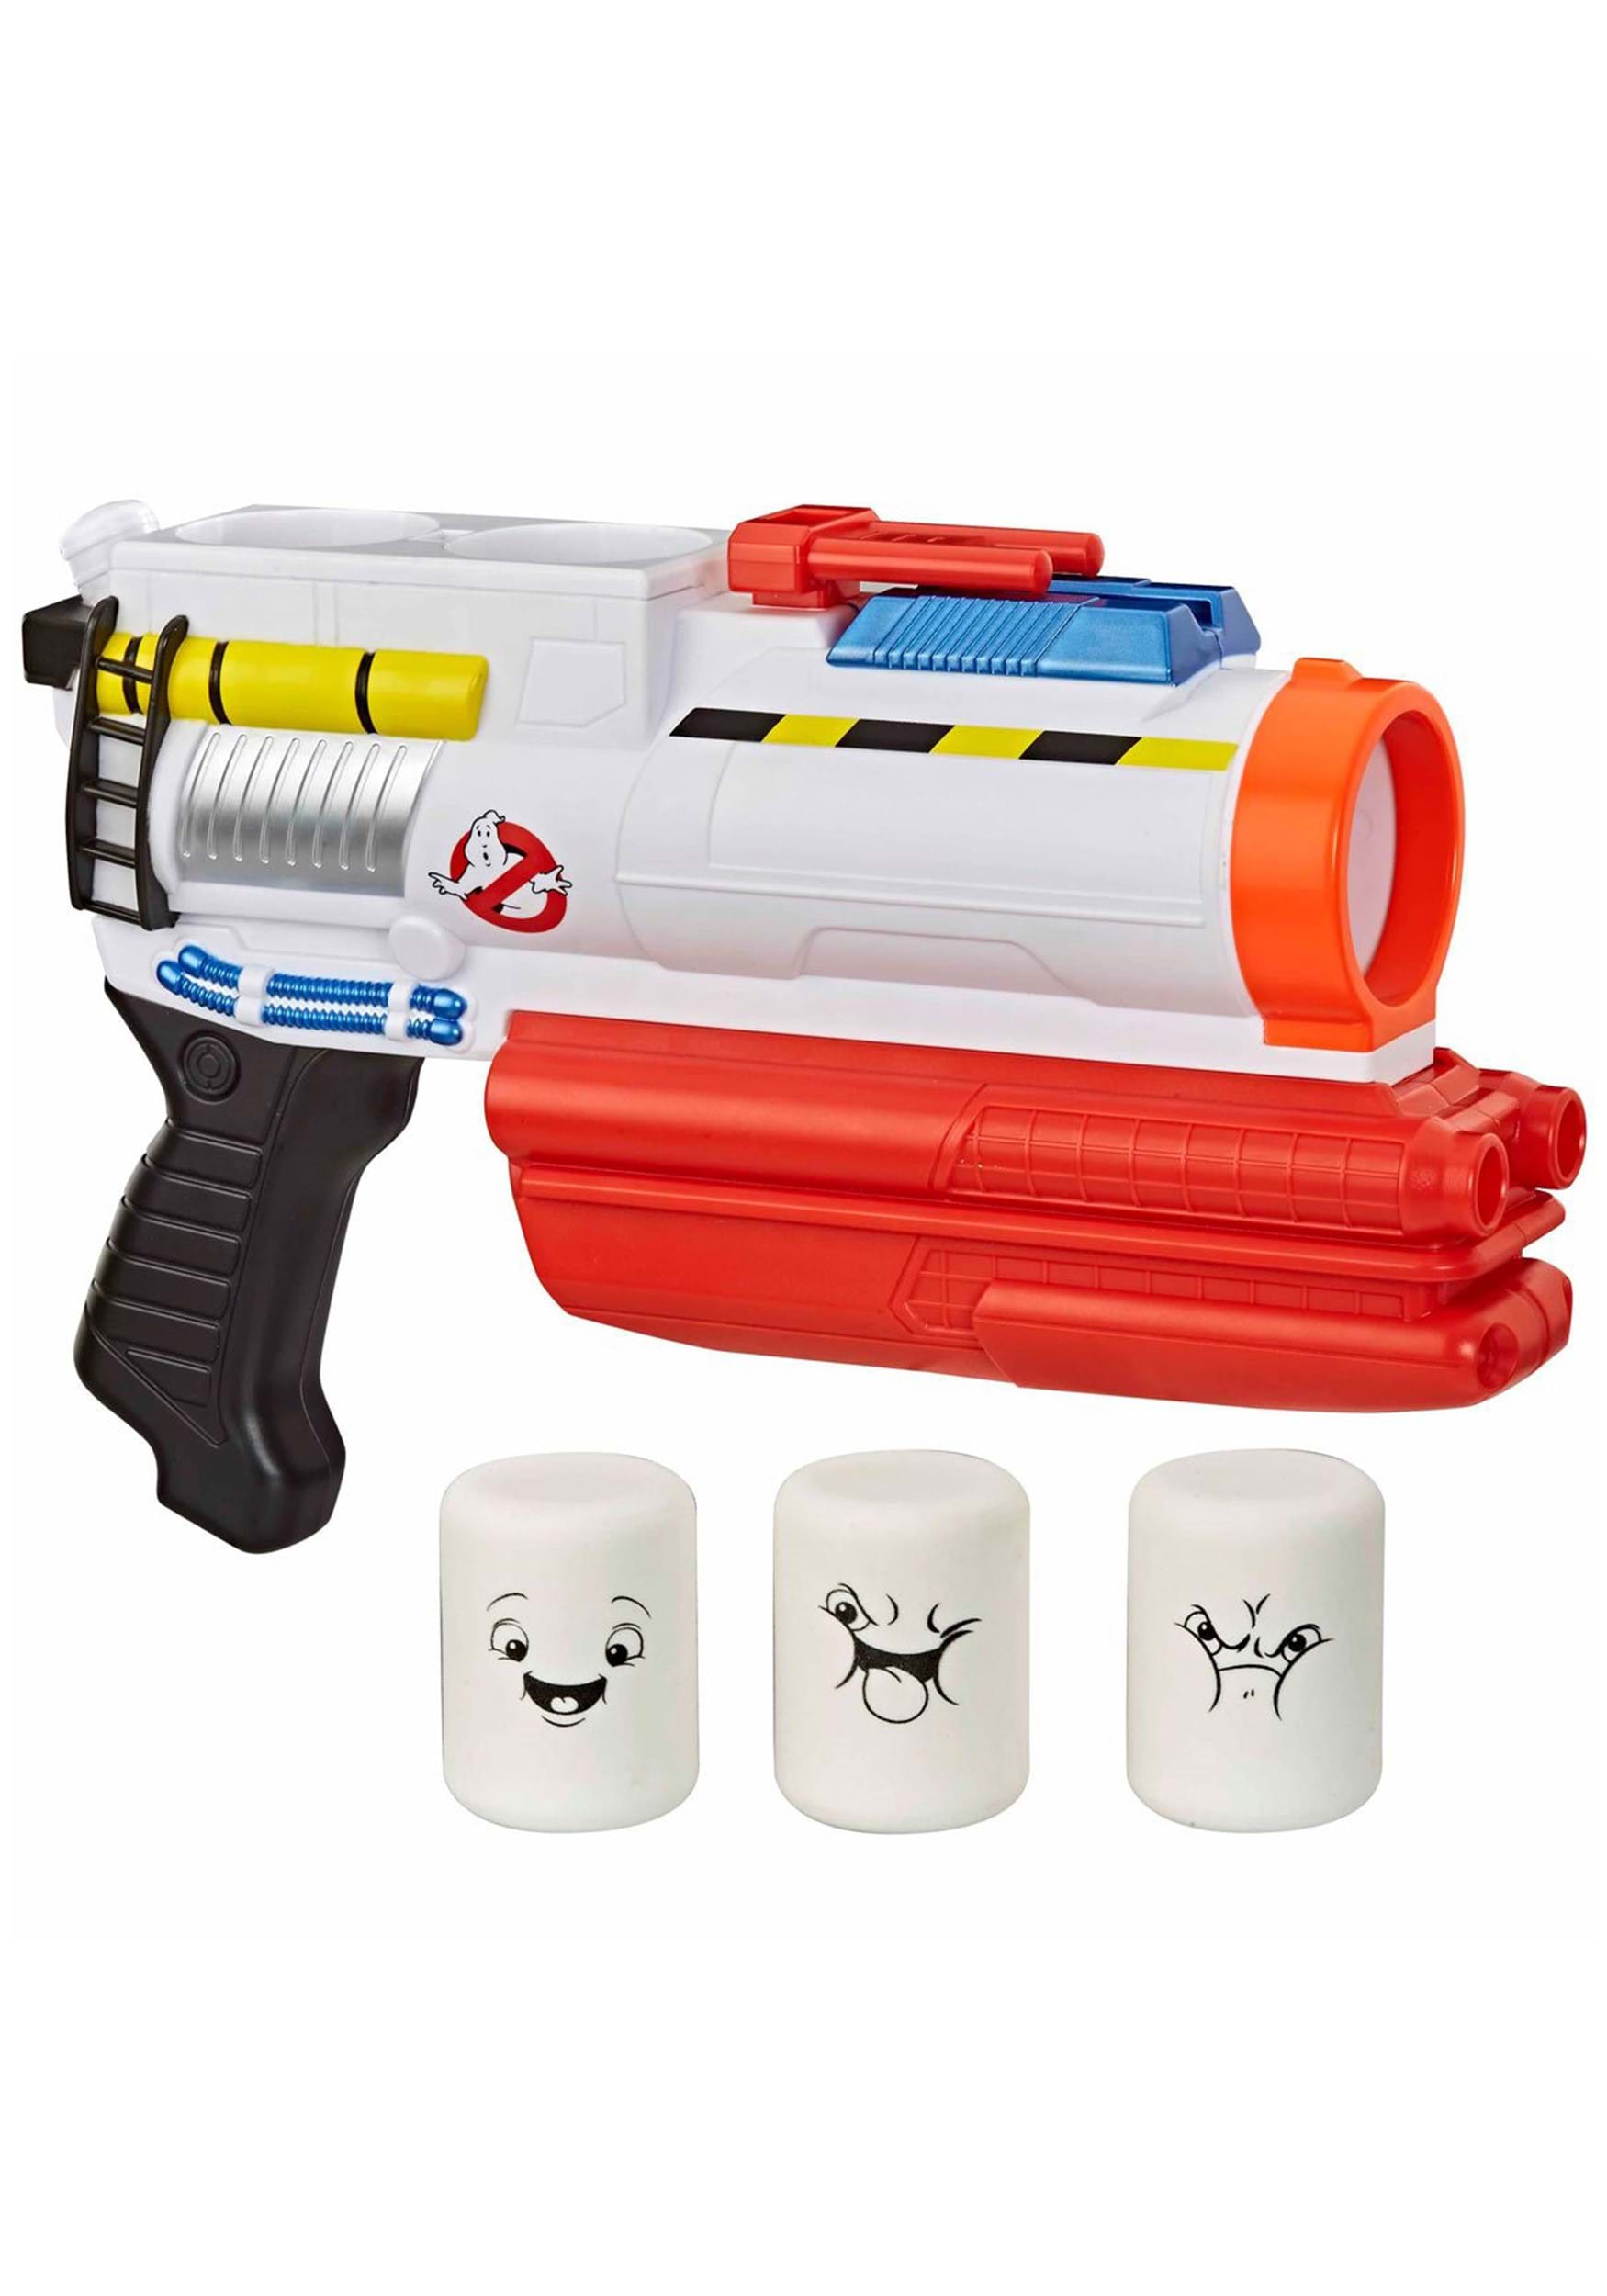 Ghostbusters: Afterlife Mini-Puft Popper Blaster Toy